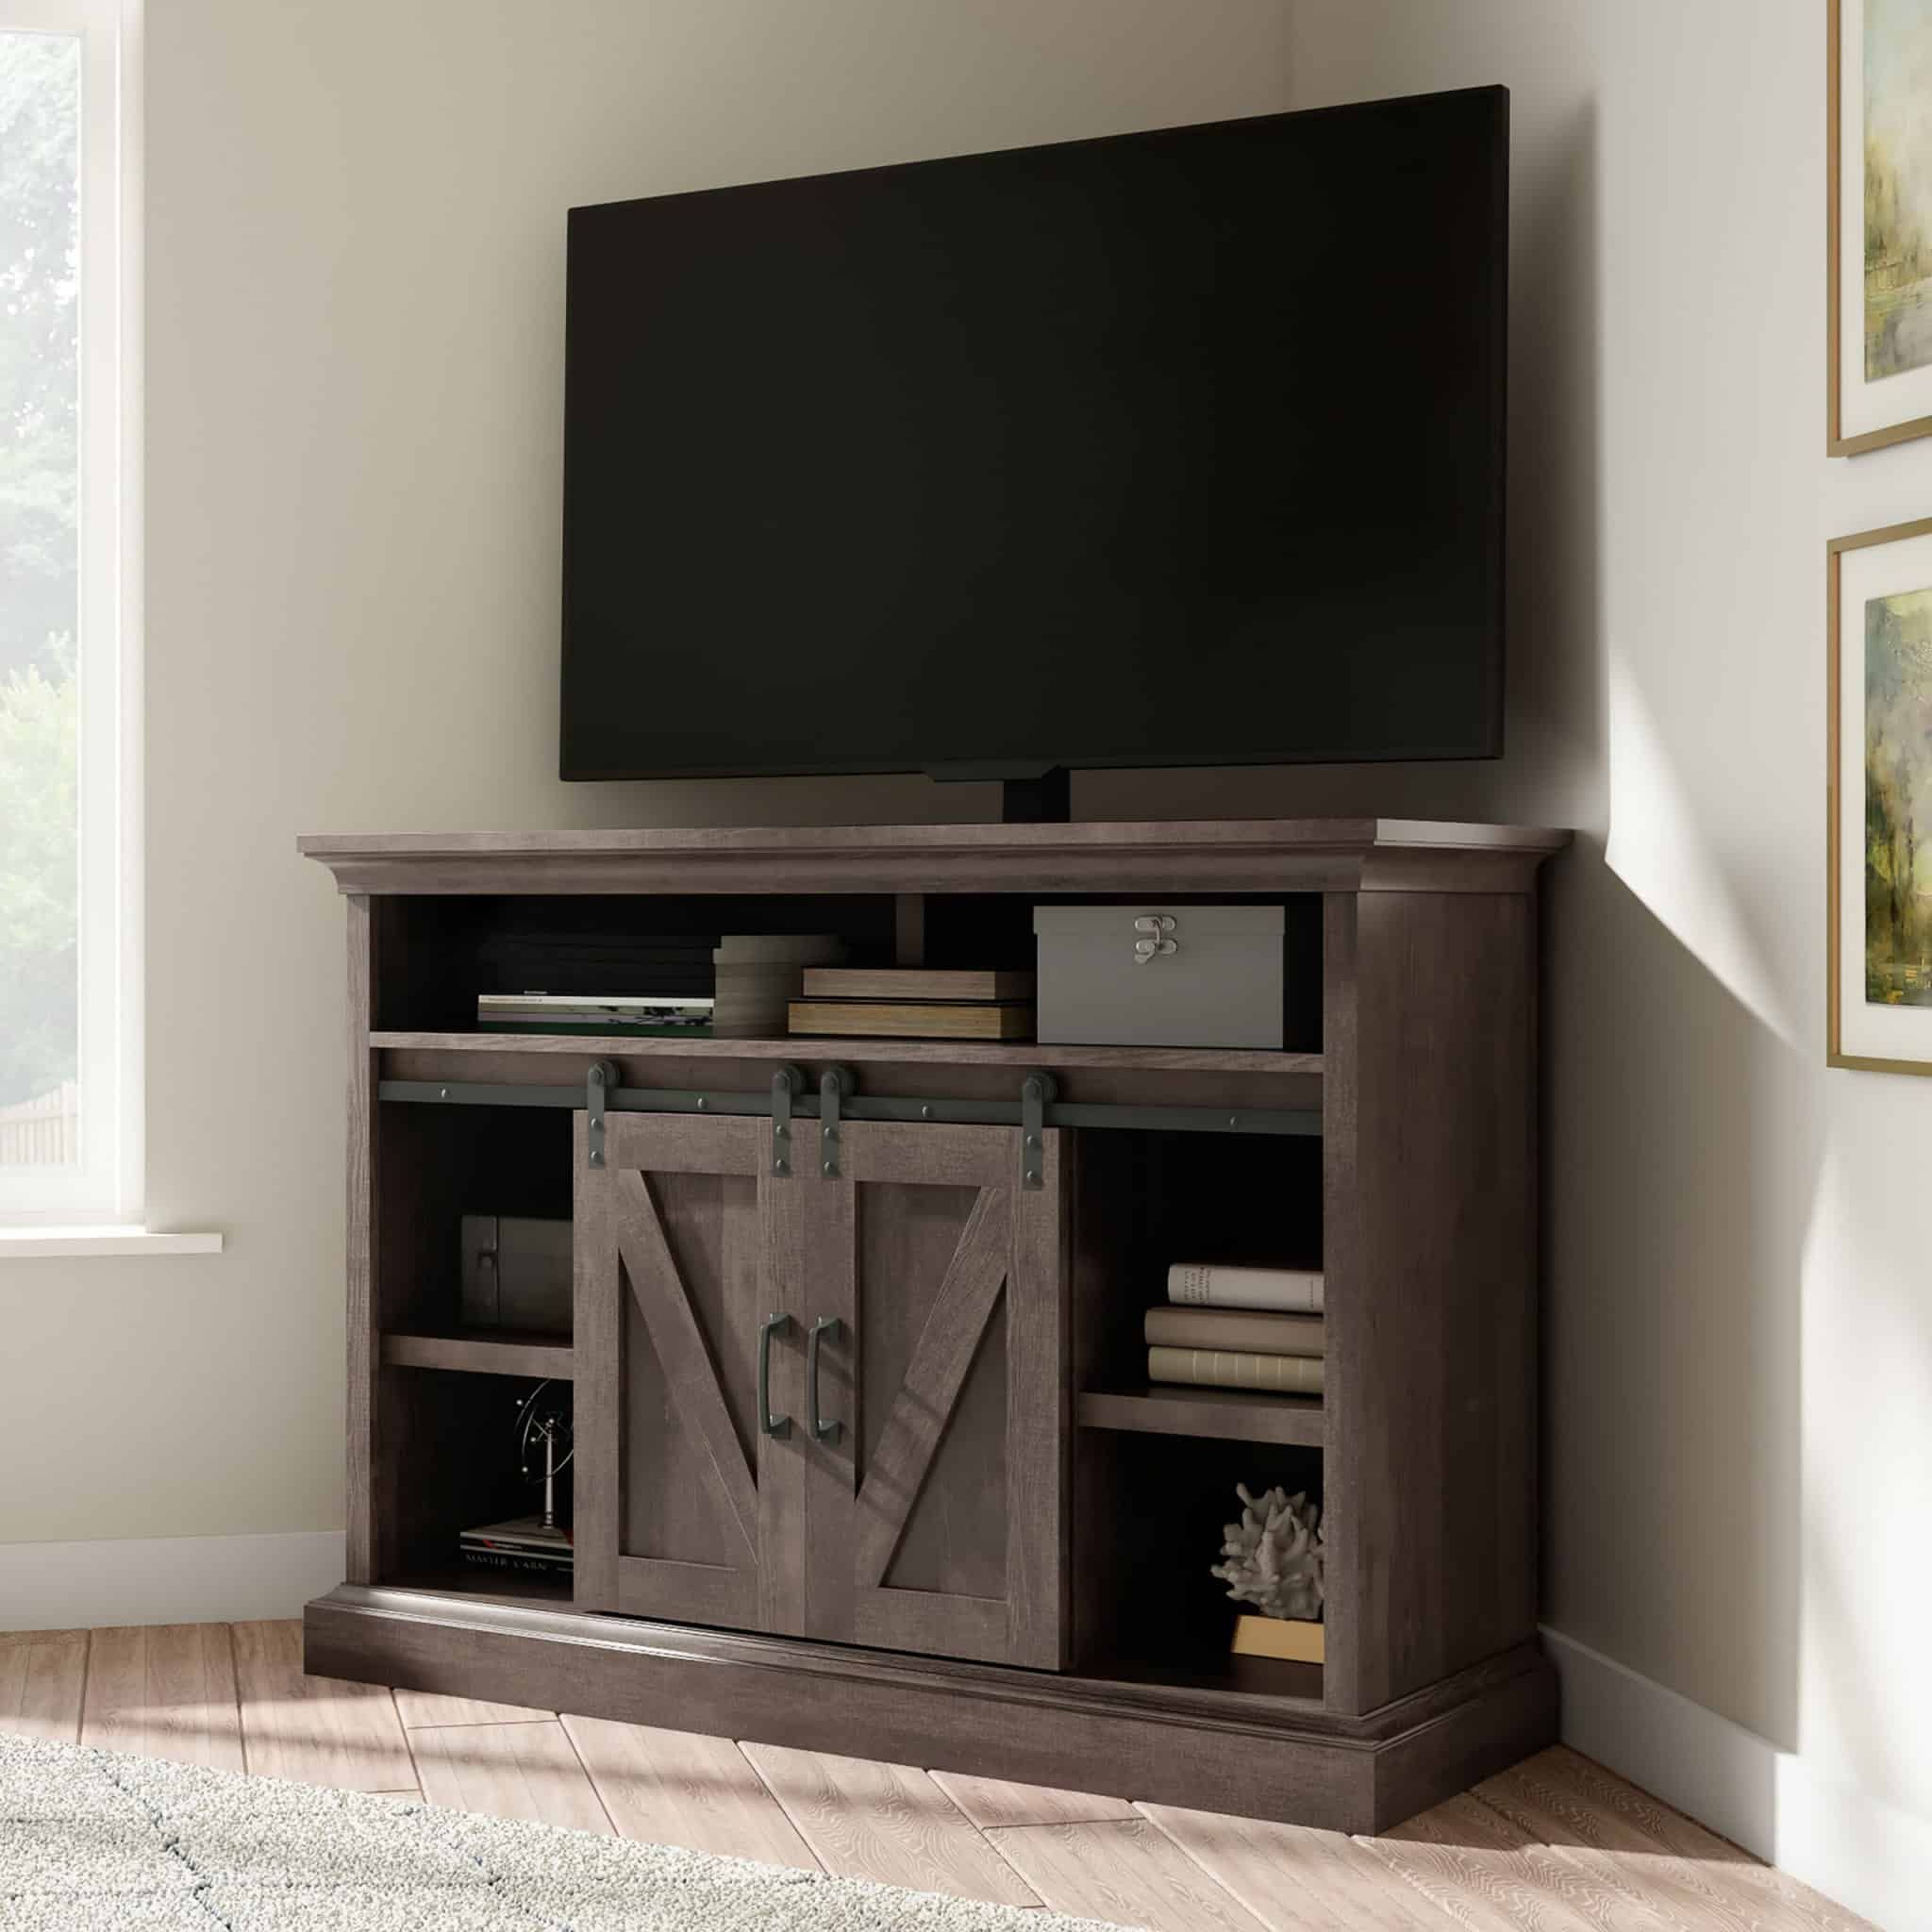 Payton 3 In 1 Tv Stand – Whalen In Whalen Payton 3 In 1 Flat Panel Tv Stands With Multiple Finishes (View 6 of 15)